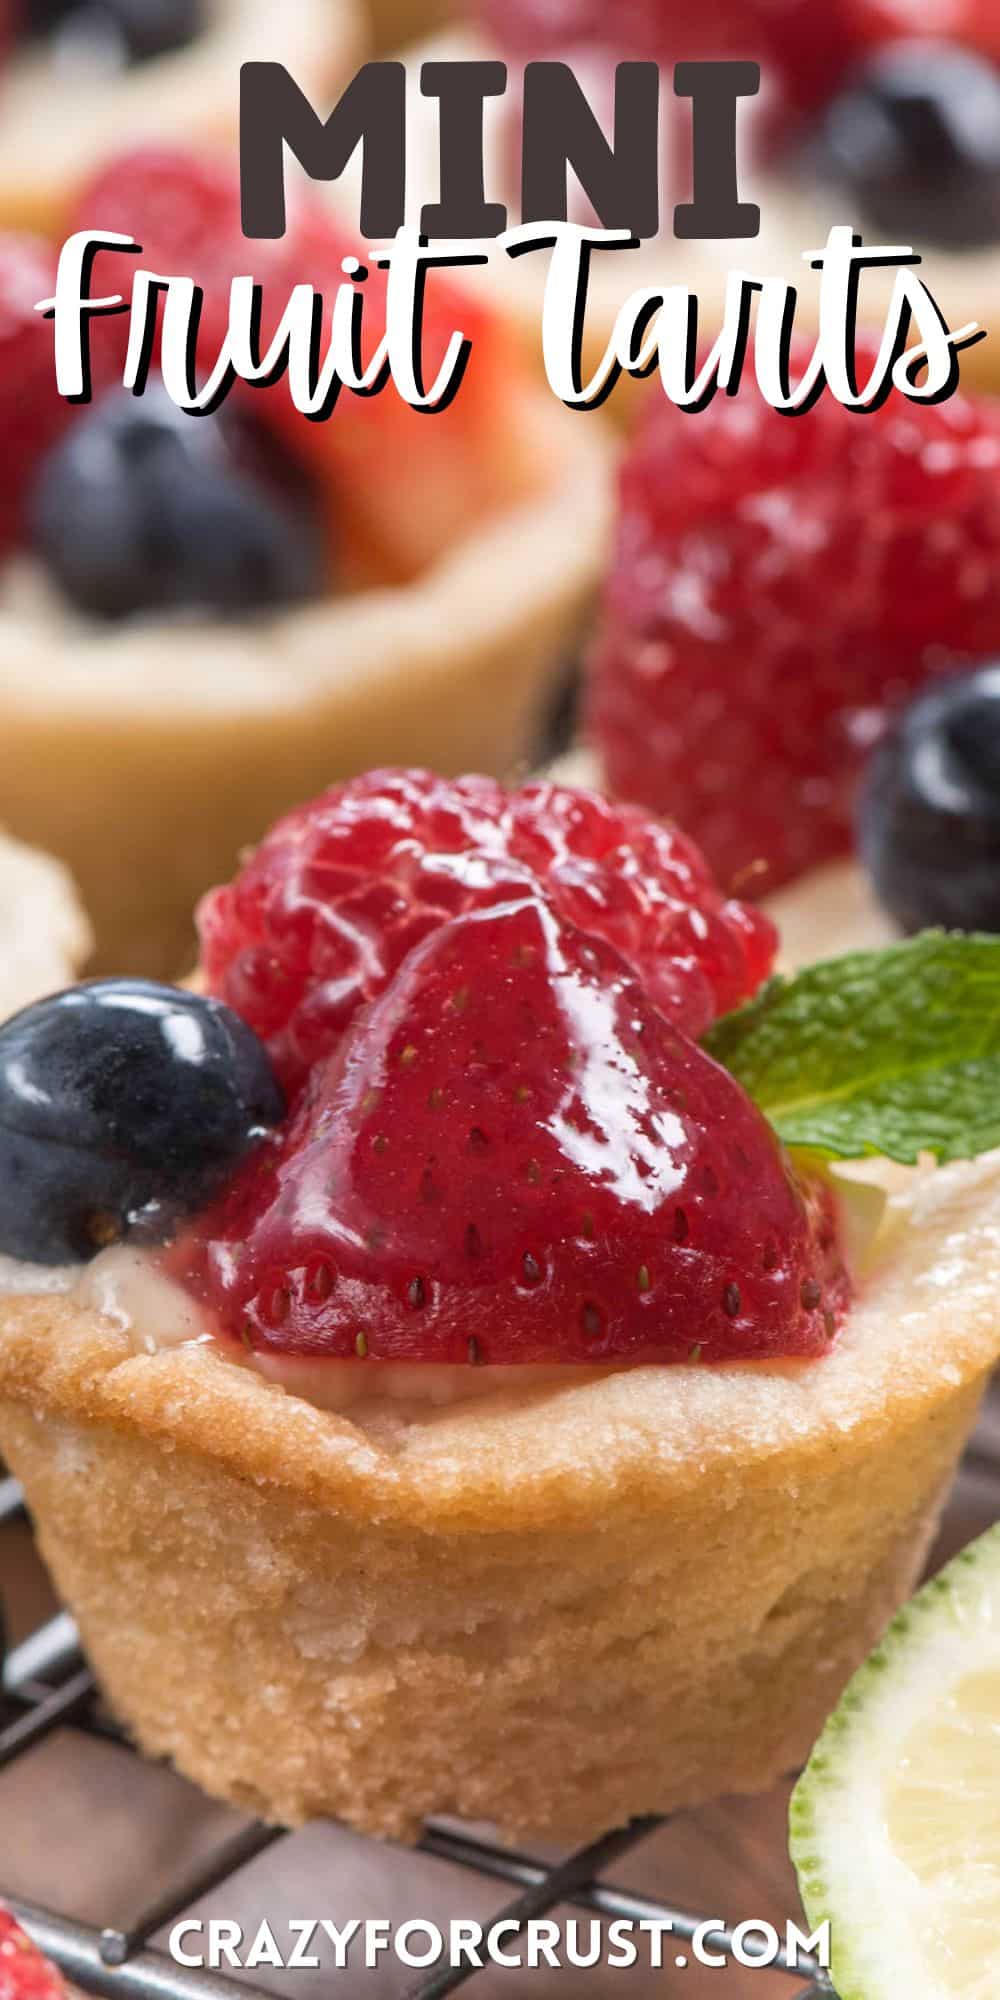 mini tarts with various fruits on top and words on the image